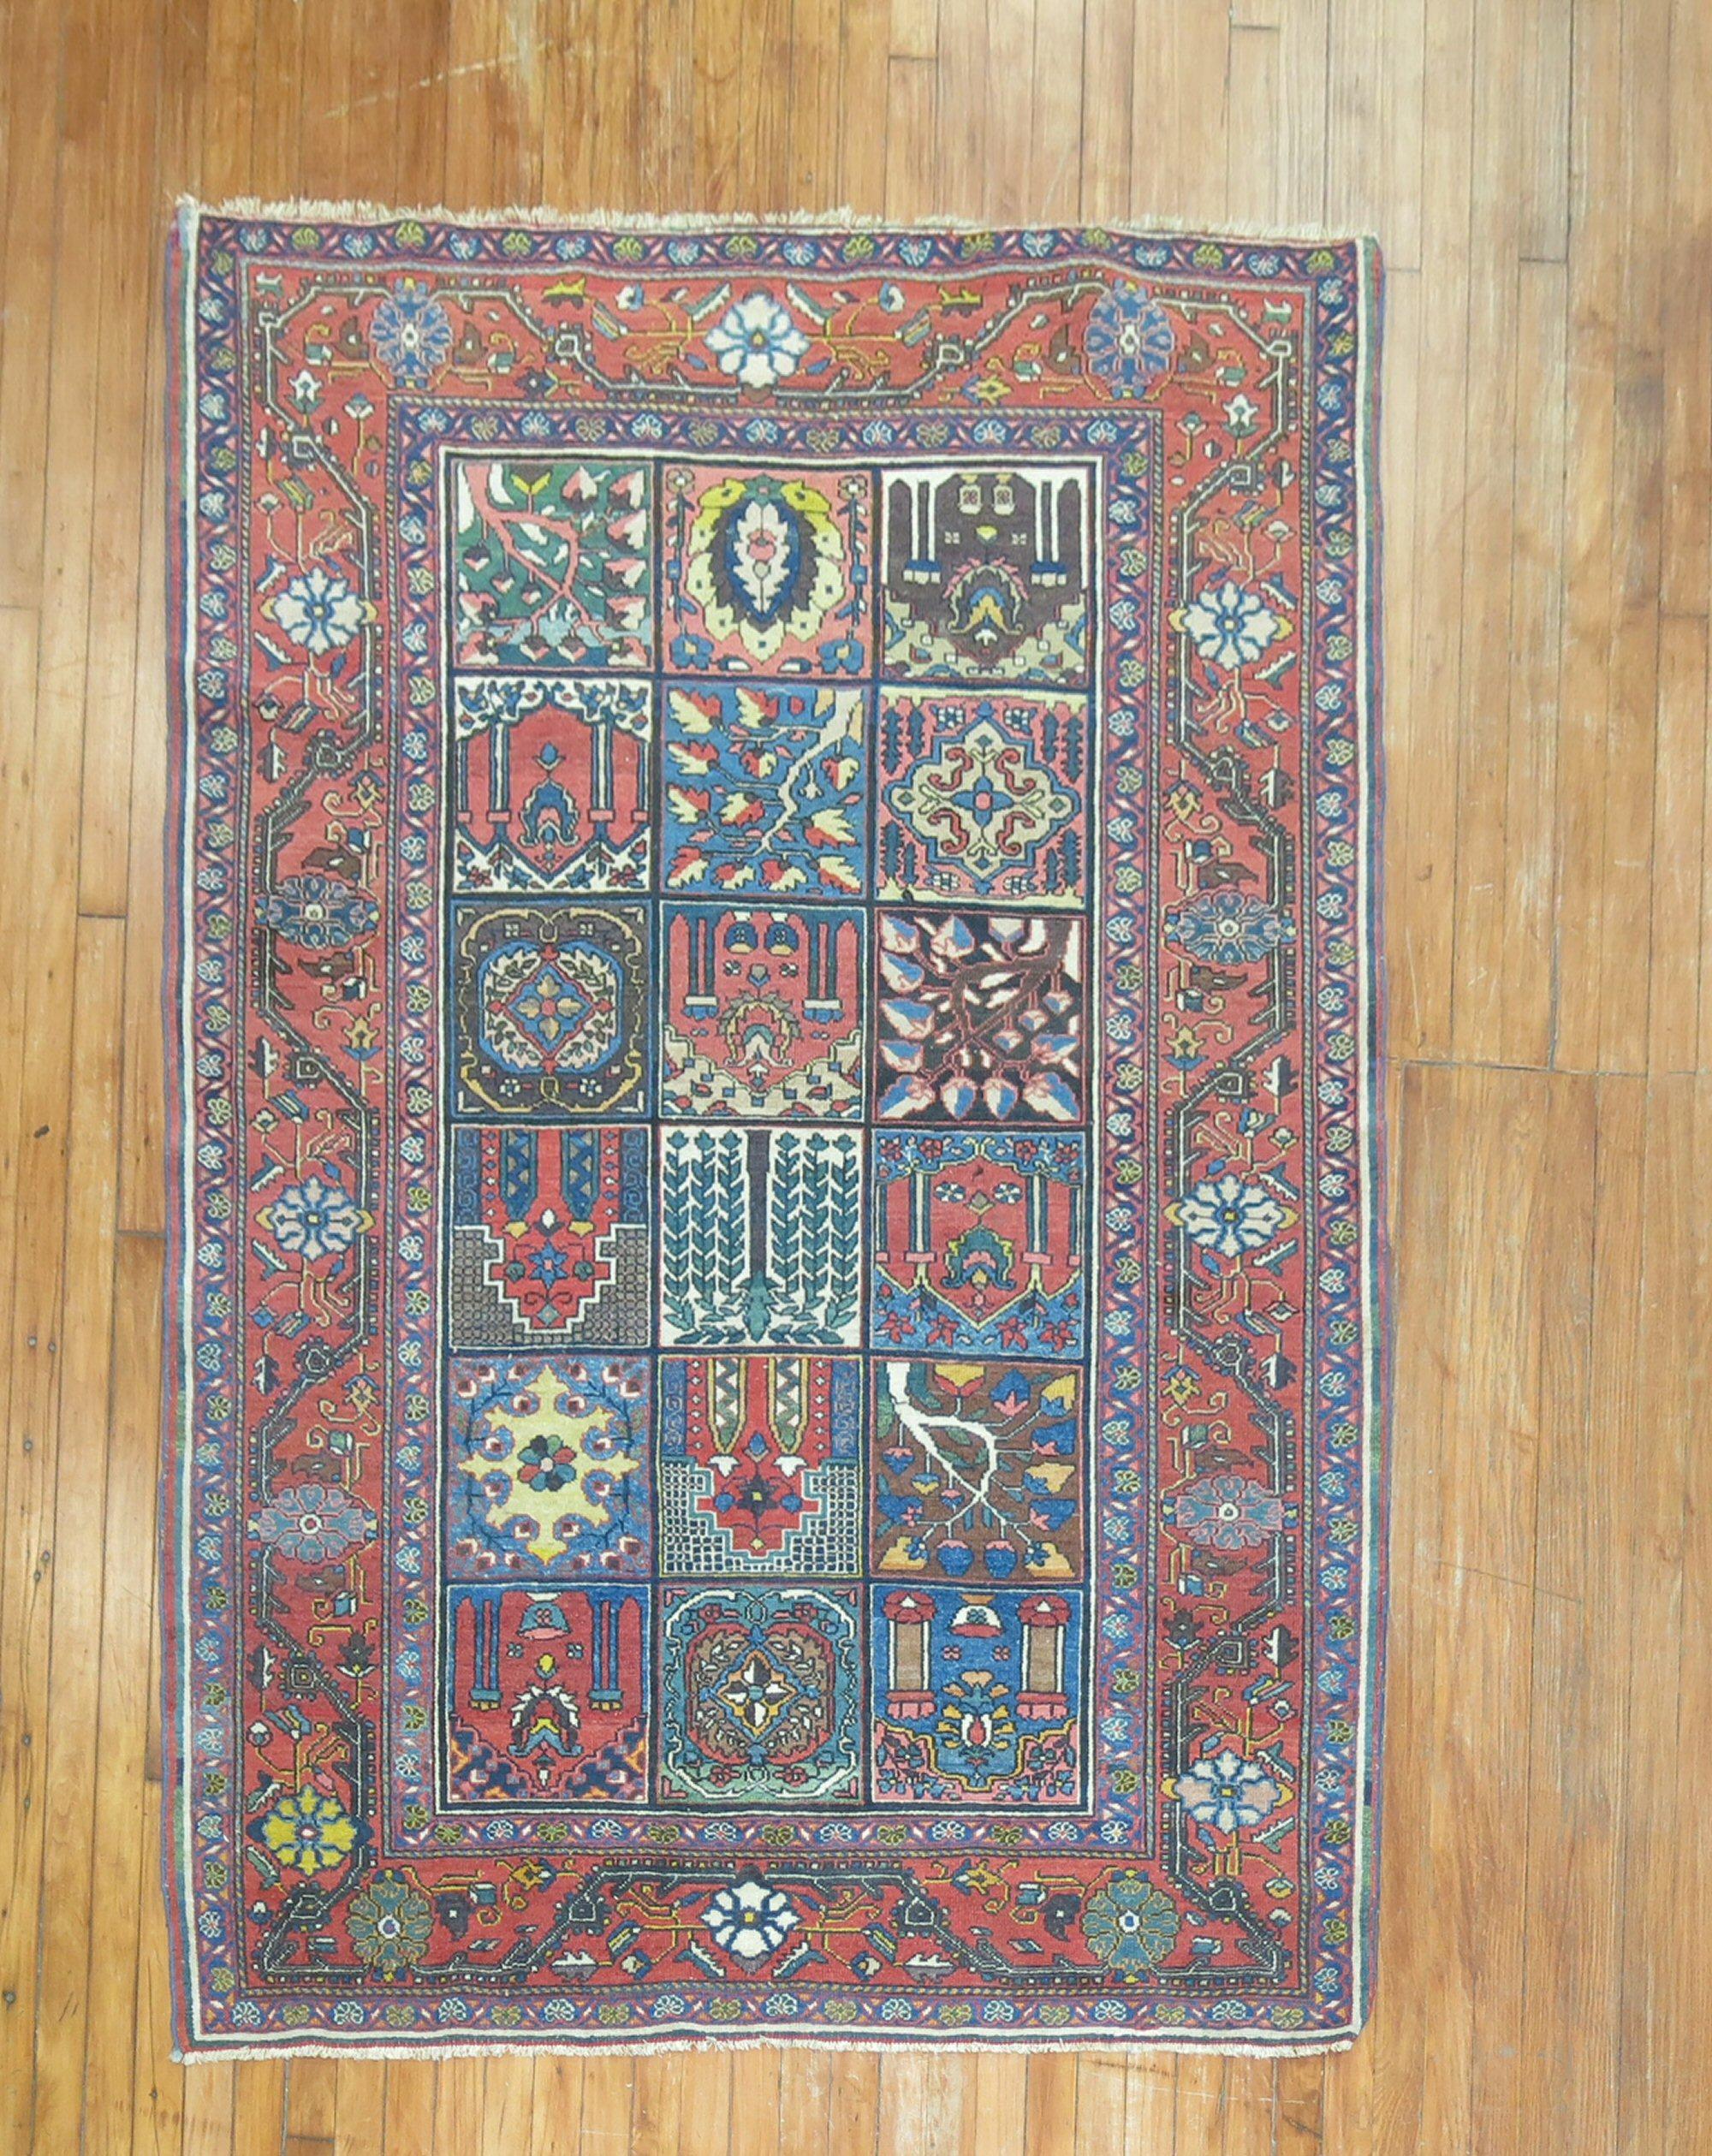 An early 20th Century Fine Senneh Bakhtiari rug with a compelling all over garden box design throughout.

Measures: 4.9'' x 6.7''.